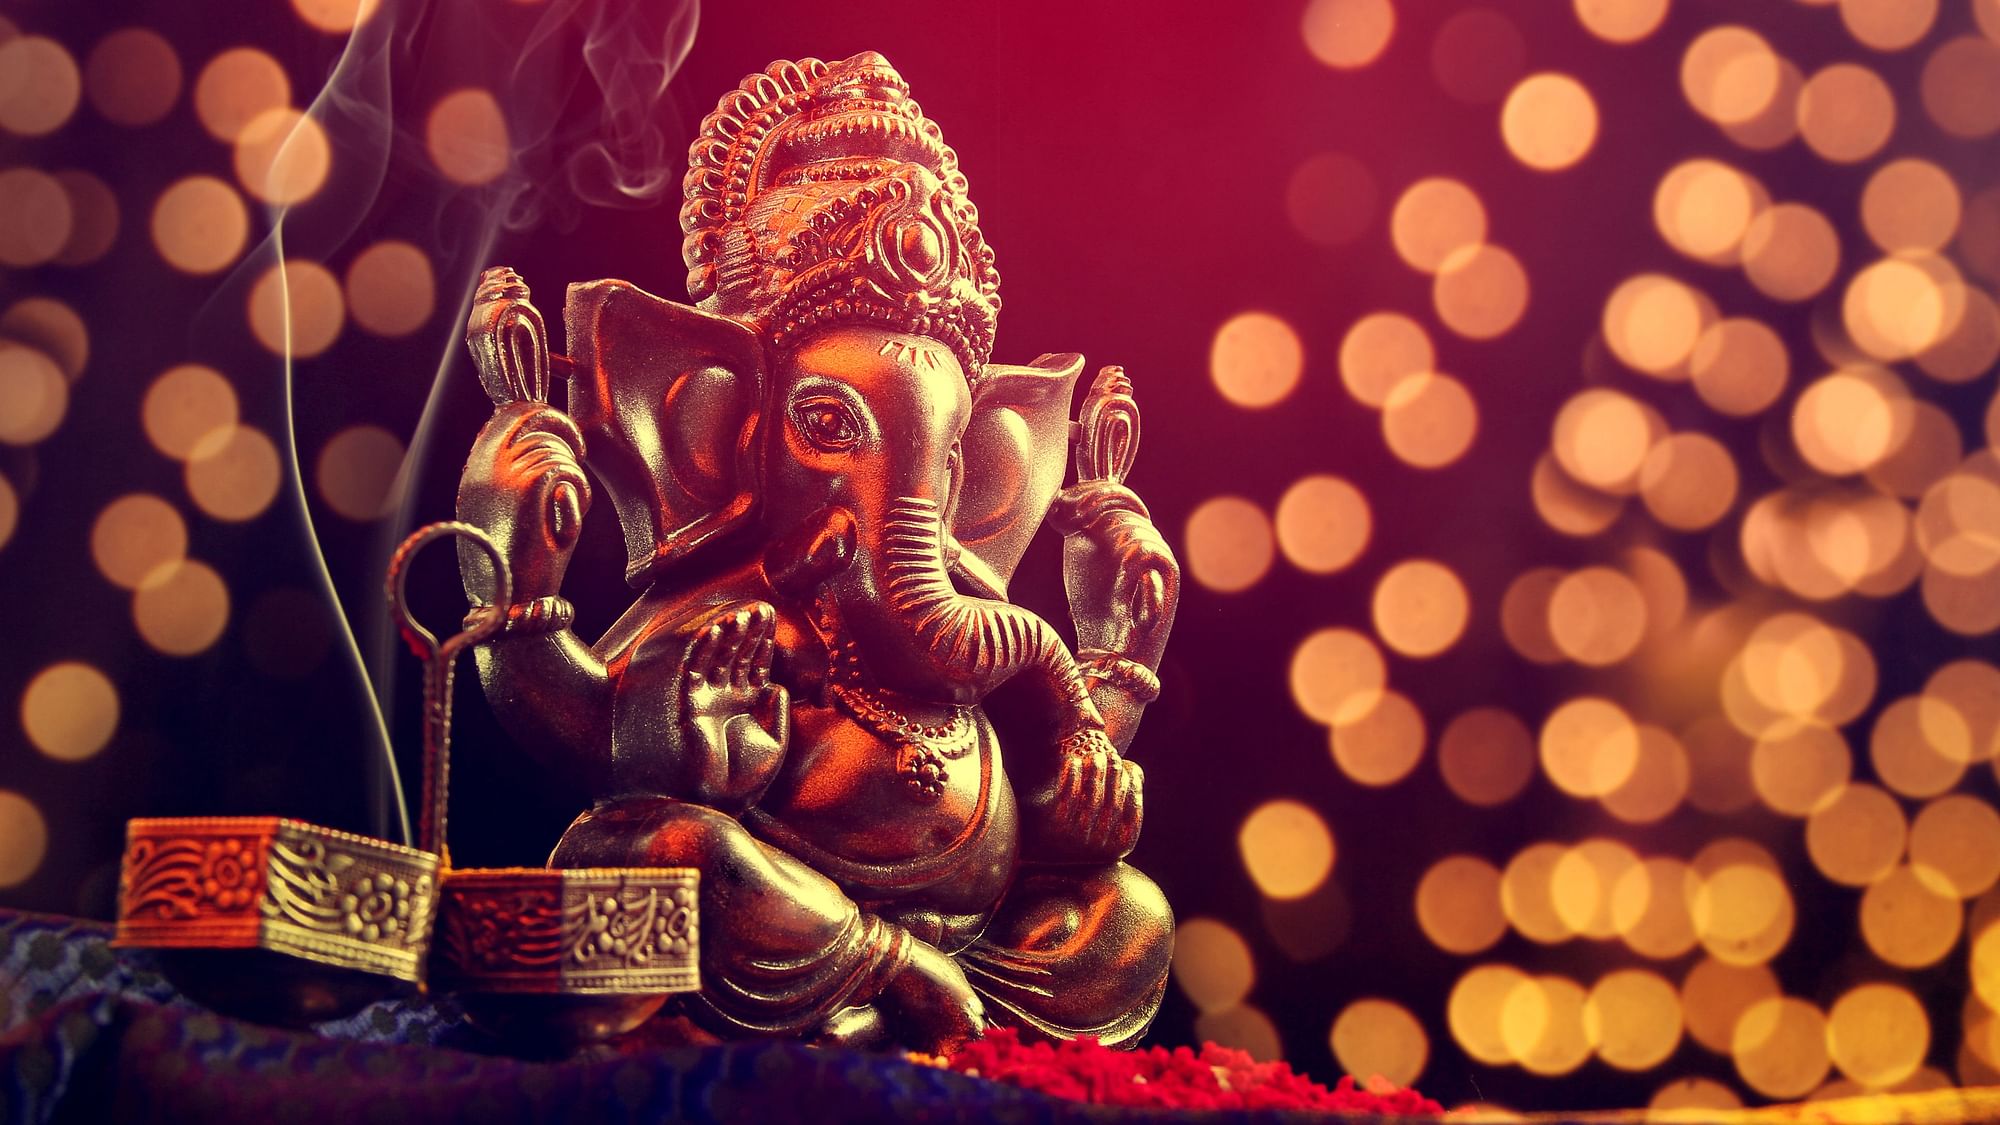 Ganesh Decoration Ideas for Home 2019: Here are some home decoration ideas for your Ganesh Chaturthi